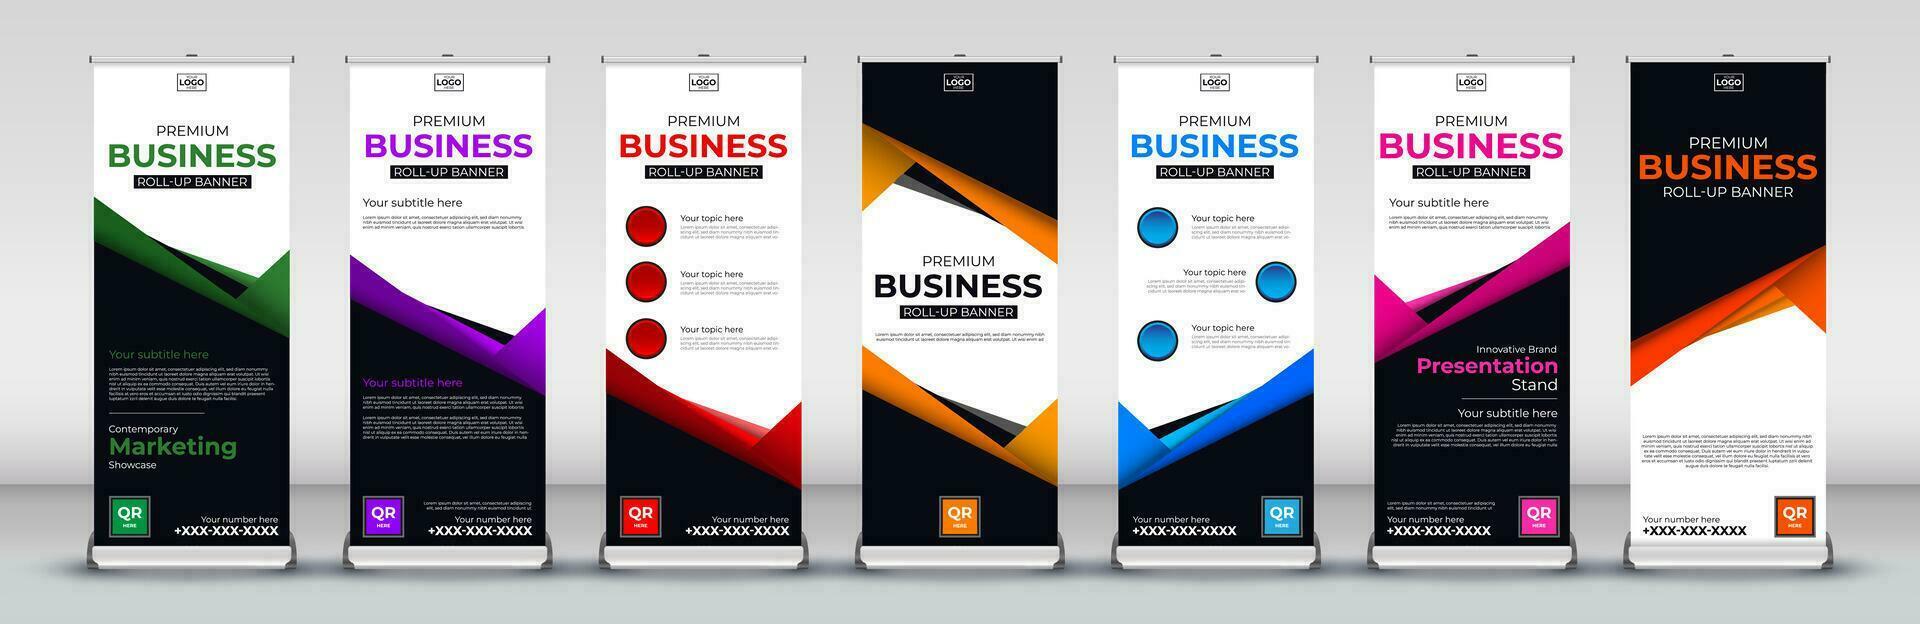 Business roll up banner design for business events, annual meetings, presentations, marketing, promotions, with pink, green, red, purple, orange, blue and yellow print ready colors vector